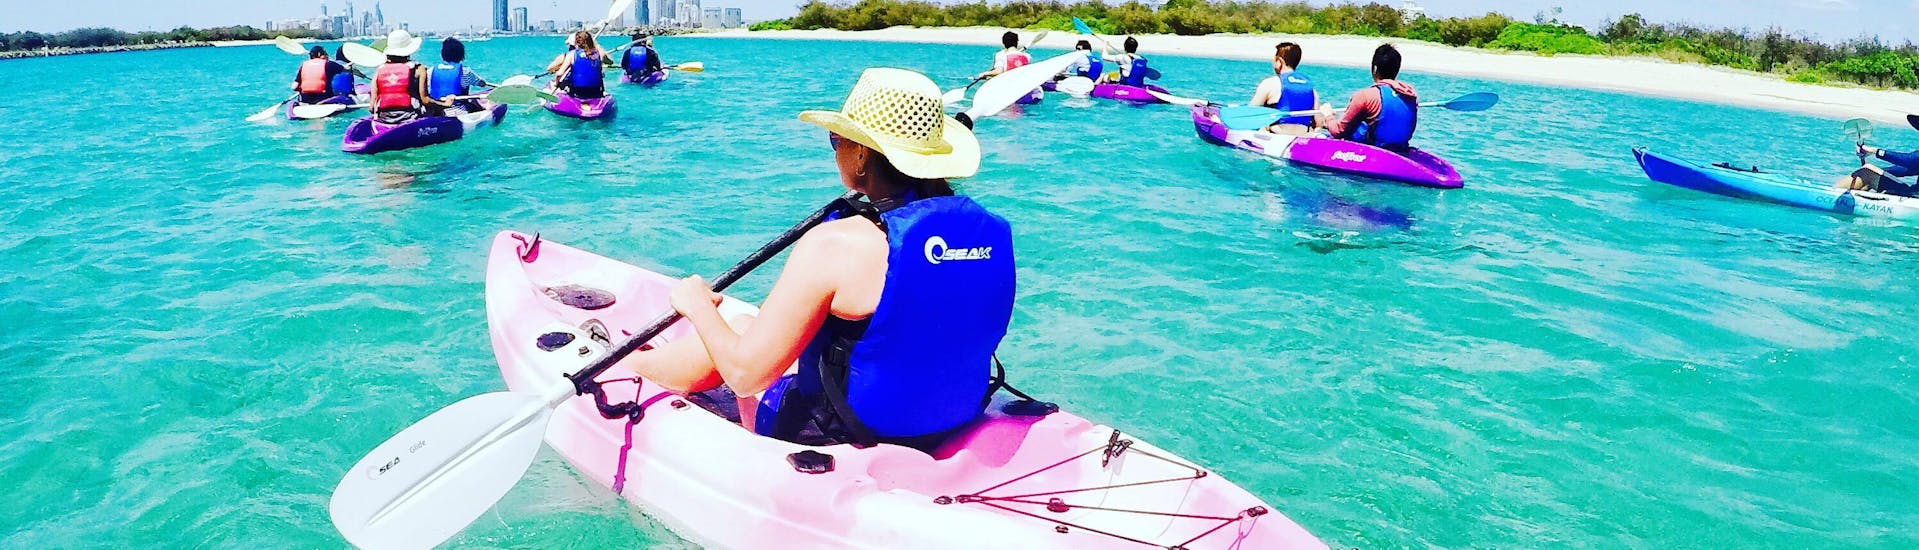 One of our guests paddling on the water during Sea Kayaking on the Gold Coast to Stradbroke Island with Australian Kayaking Adventure.